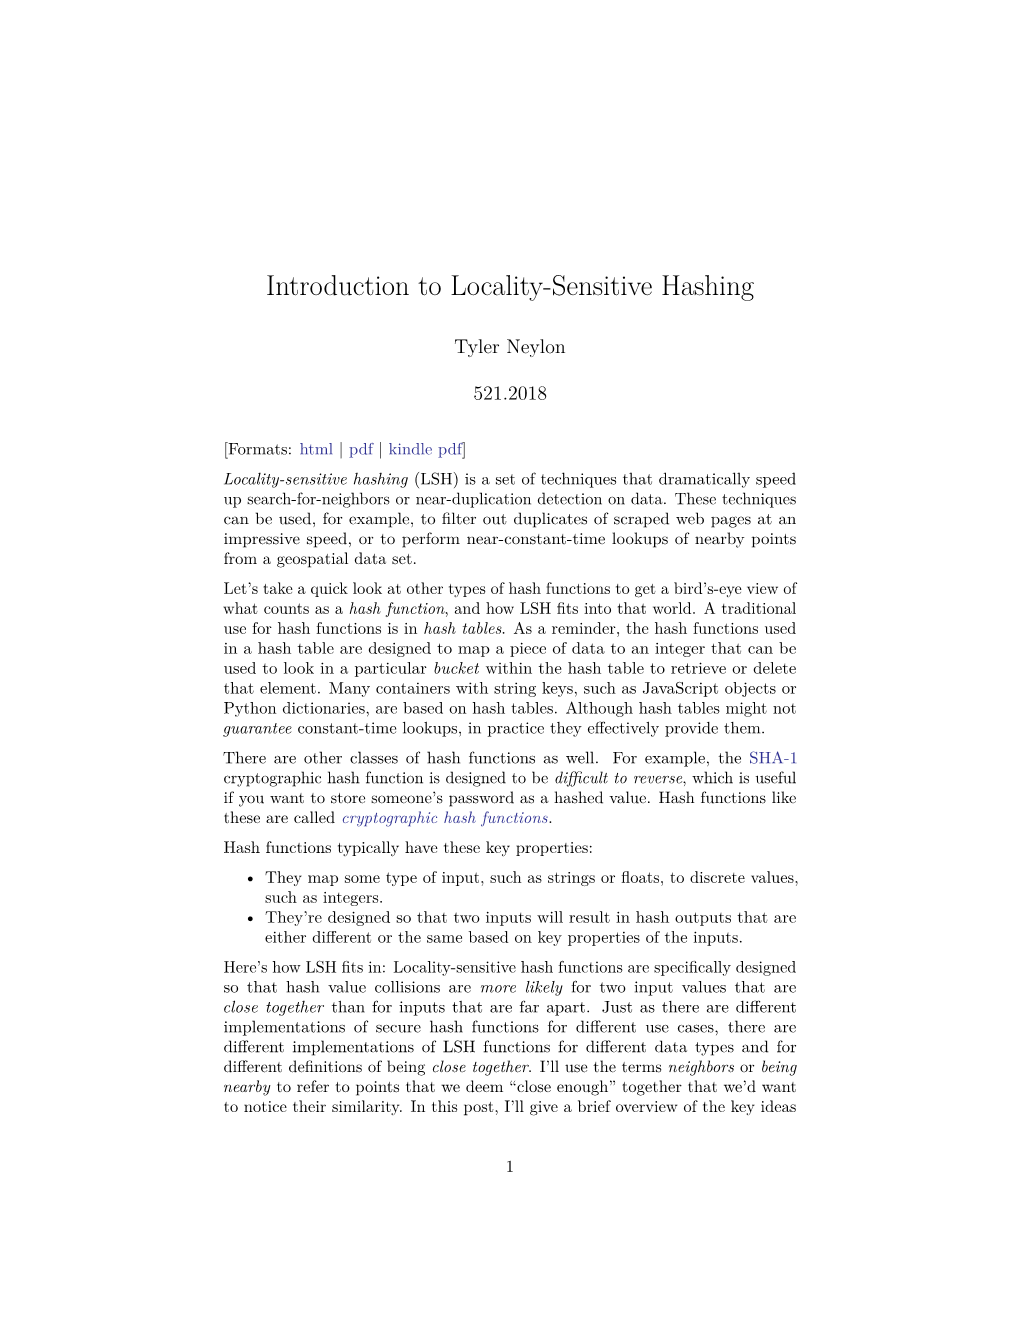 Introduction to Locality-Sensitive Hashing